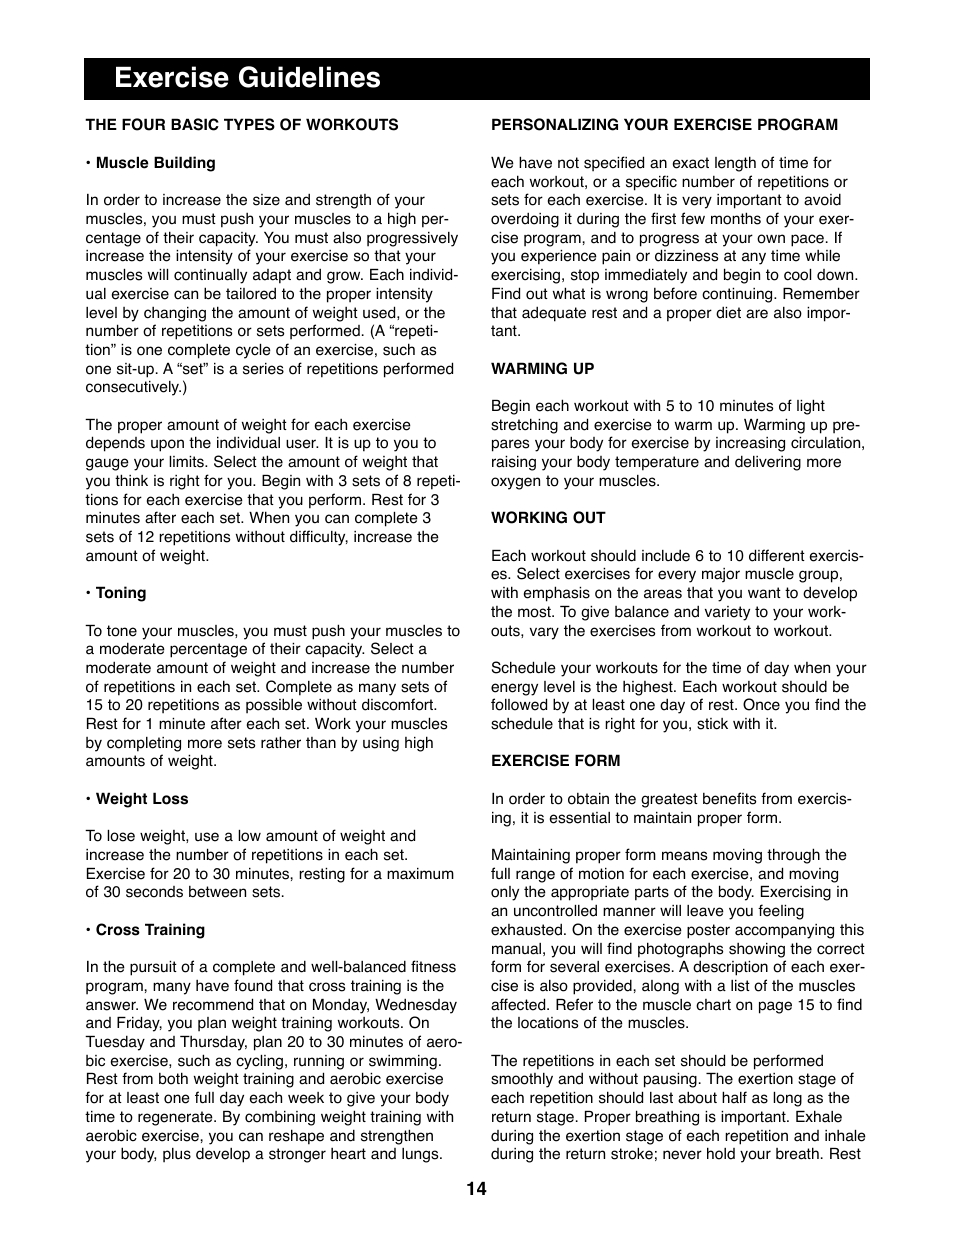 Exercise guidelines | Weider 148 User Manual | Page 14 / 20